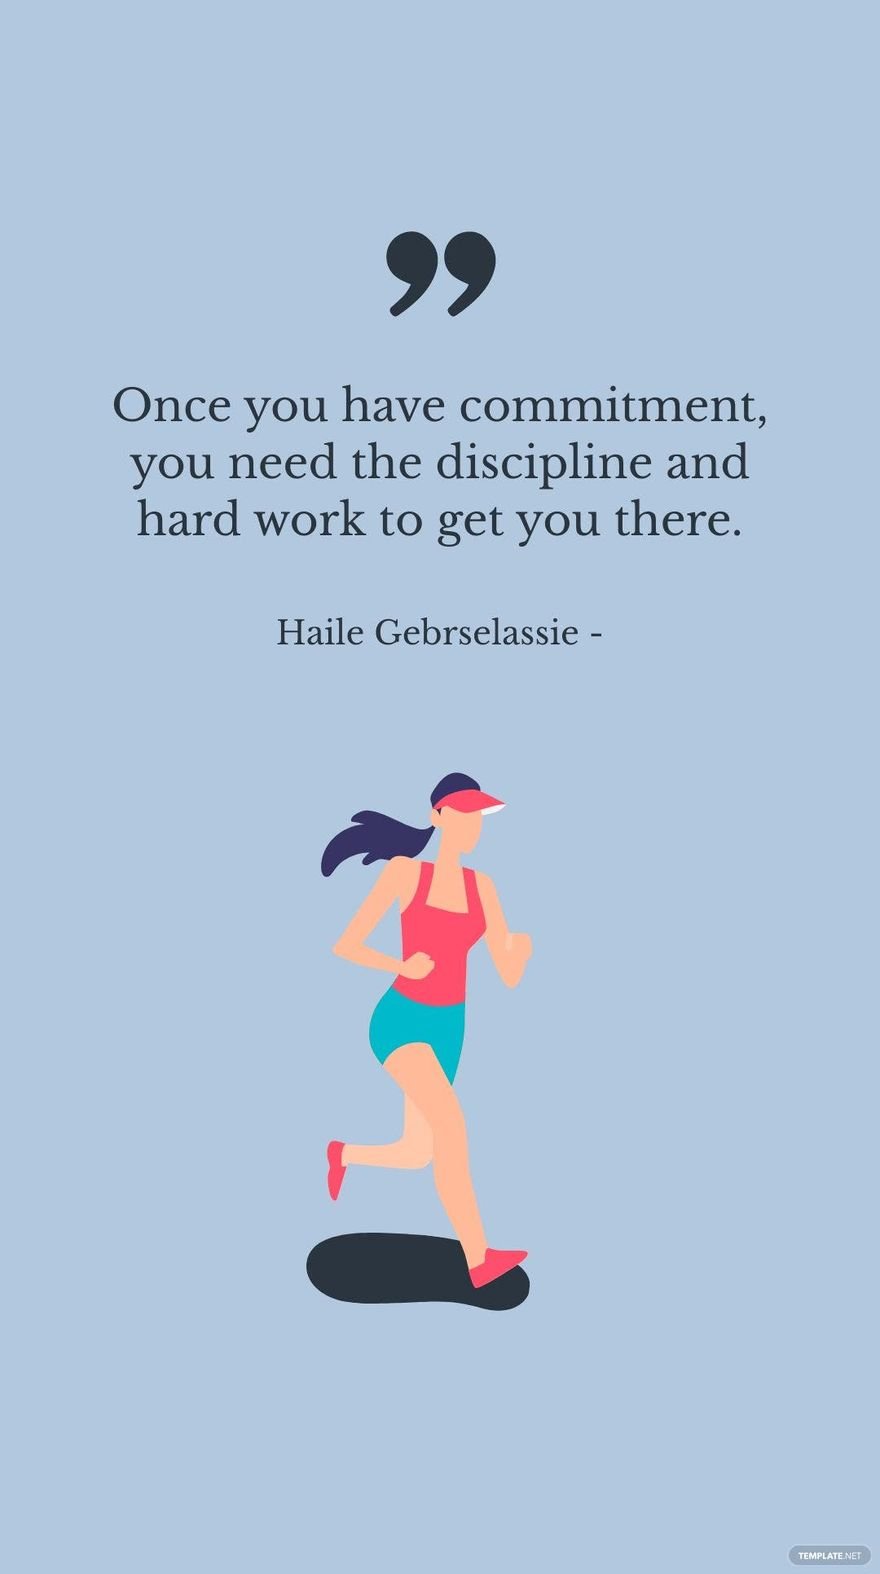 Free Haile Gebrselassie - Once you have commitment, you need the discipline and hard work to get you there. in JPG